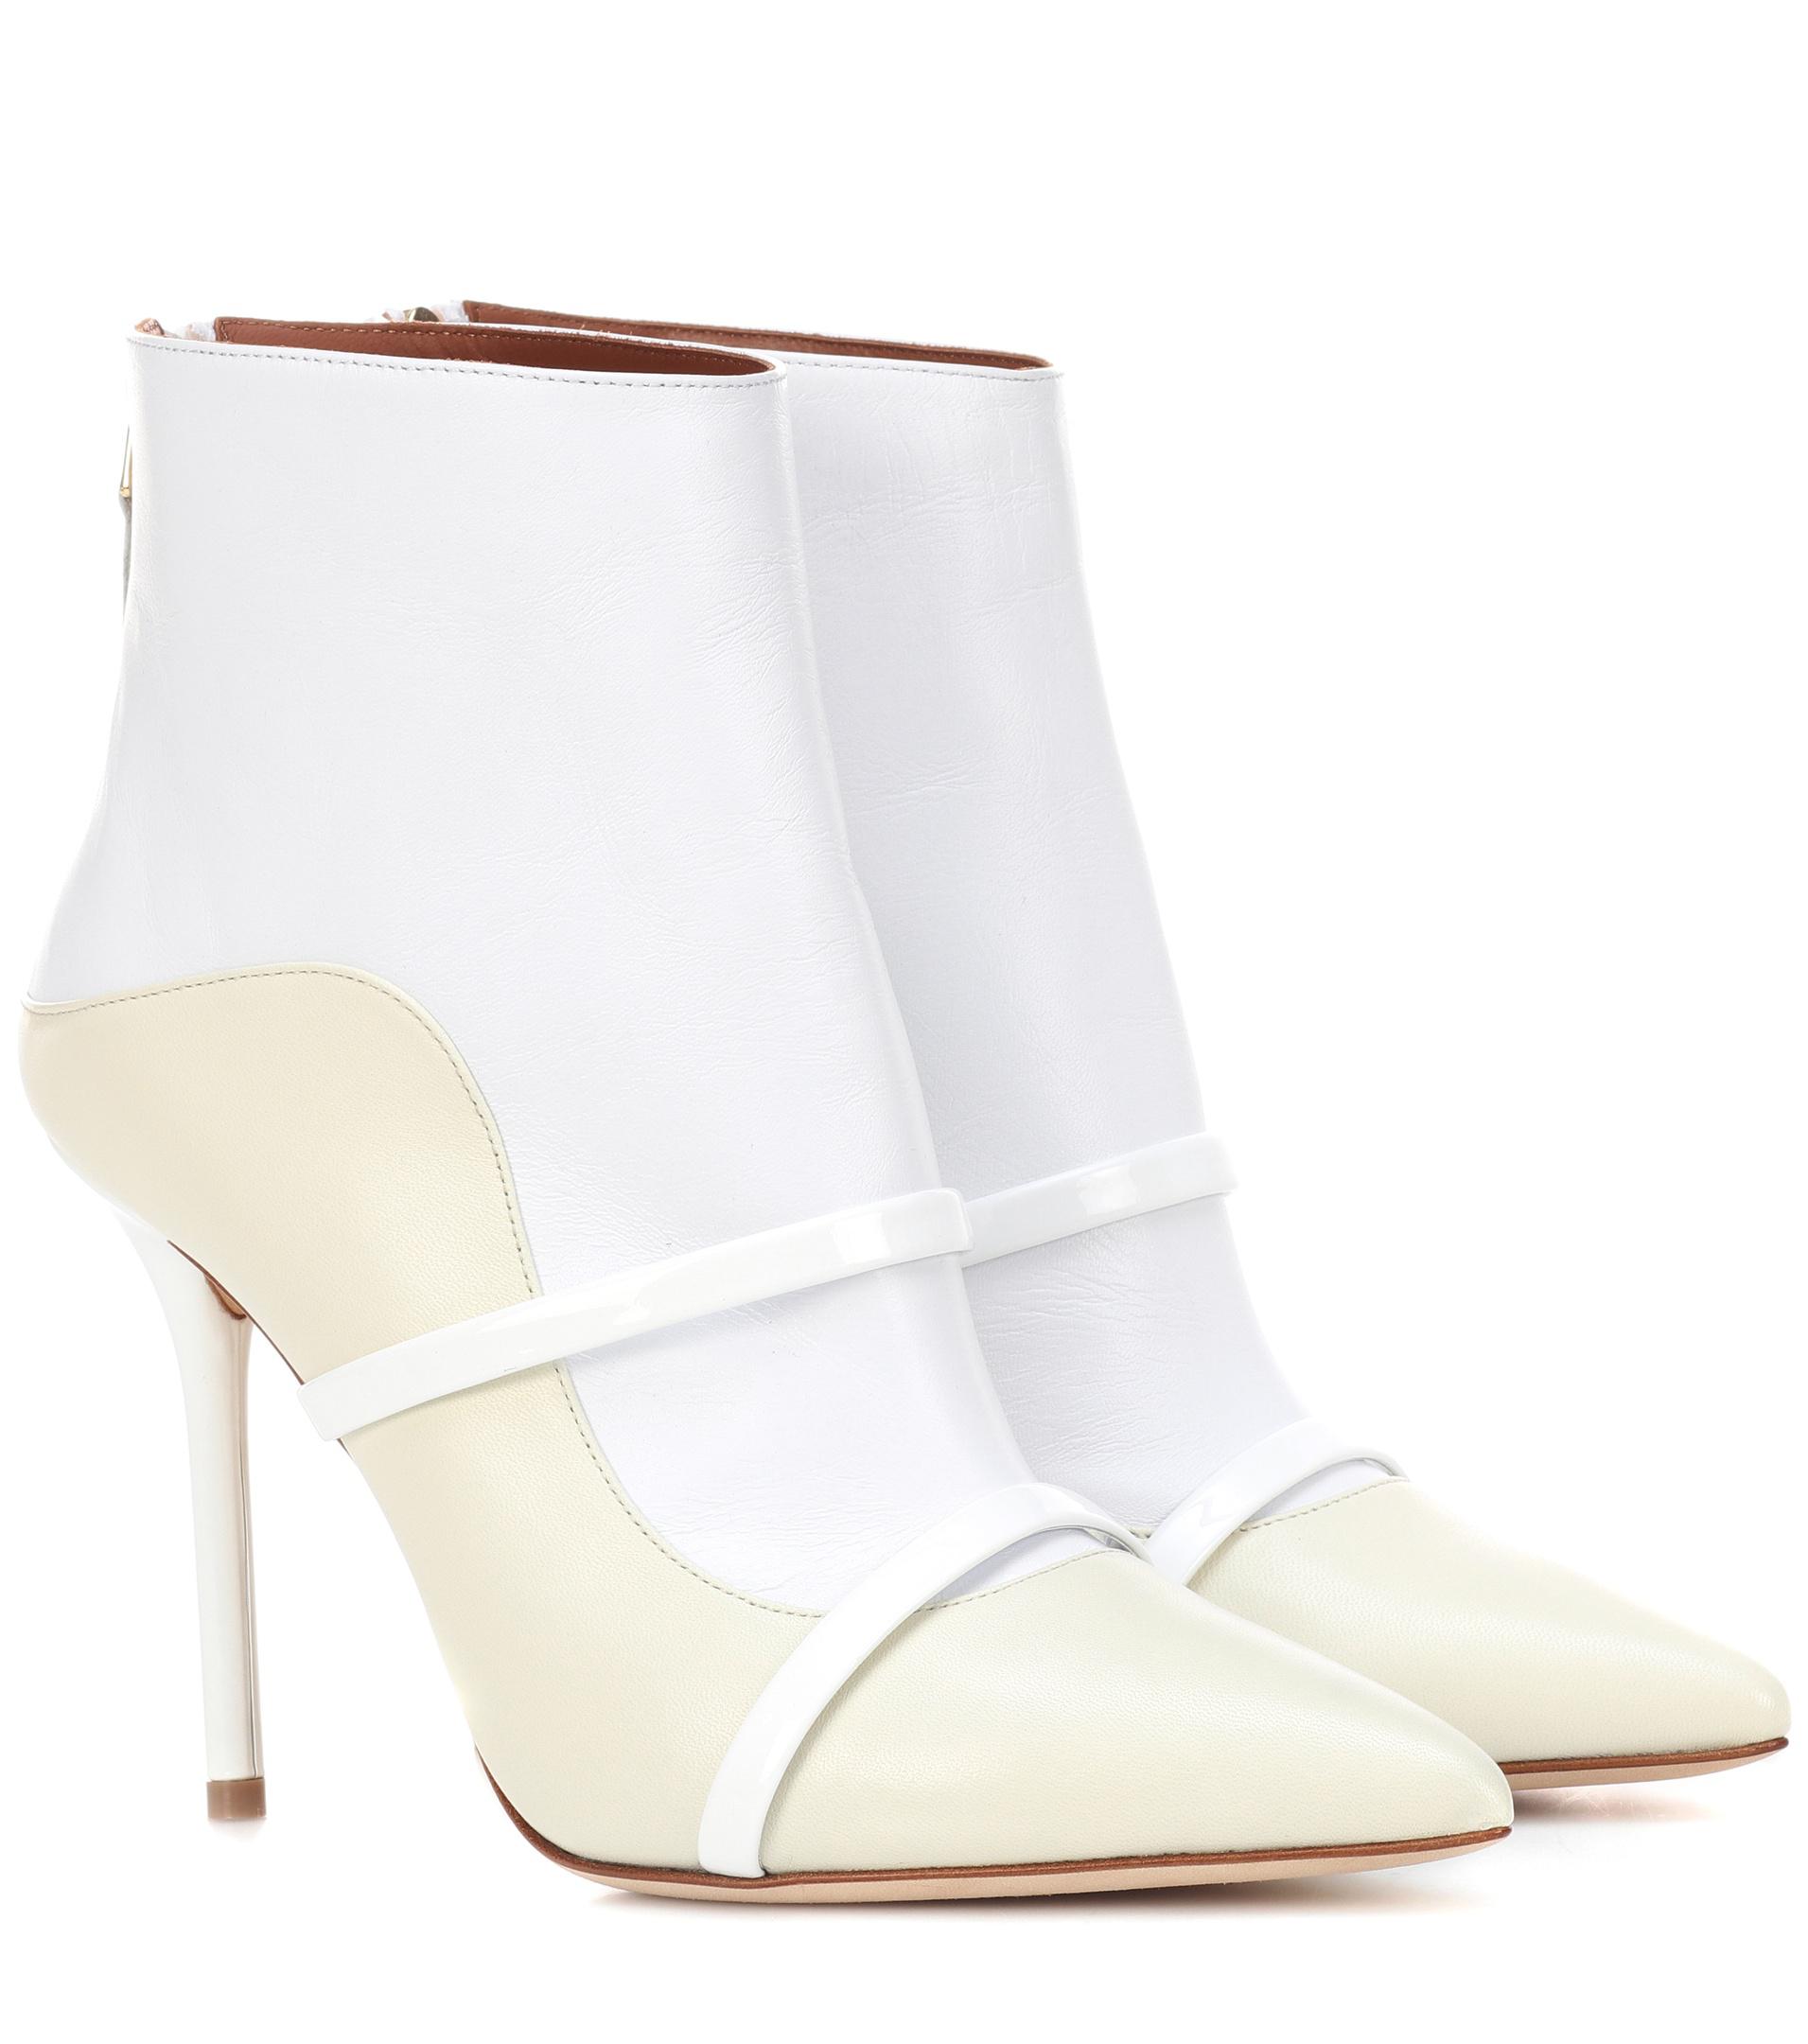 Malone Souliers Madison 100 Leather Ankle Boots in White - Lyst